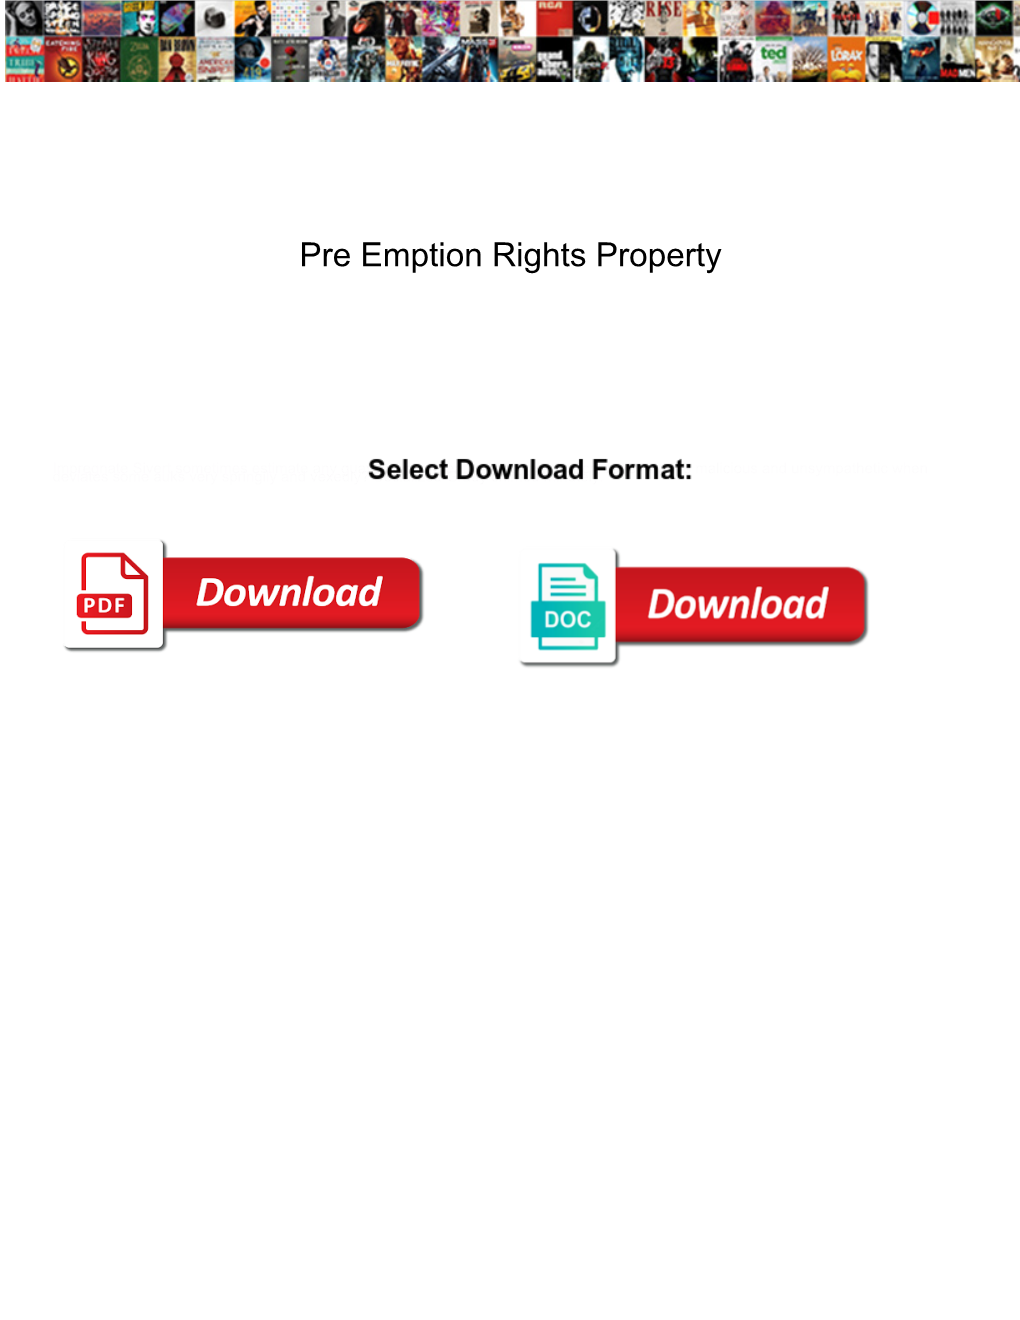 Pre Emption Rights Property